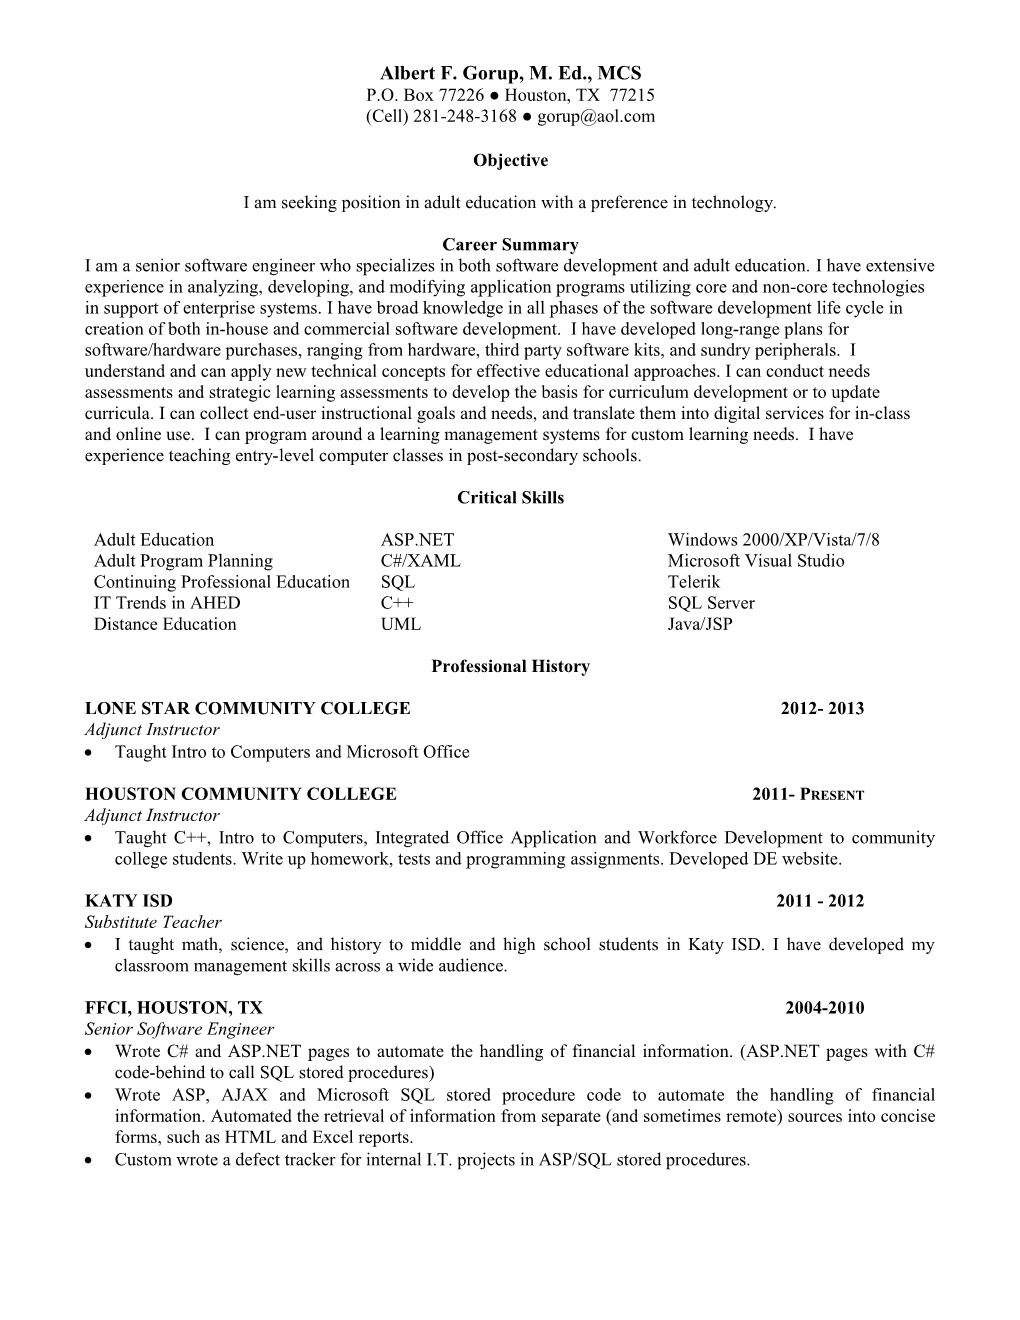 I Am Seeking Position in Adult Education with a Preference in Technology